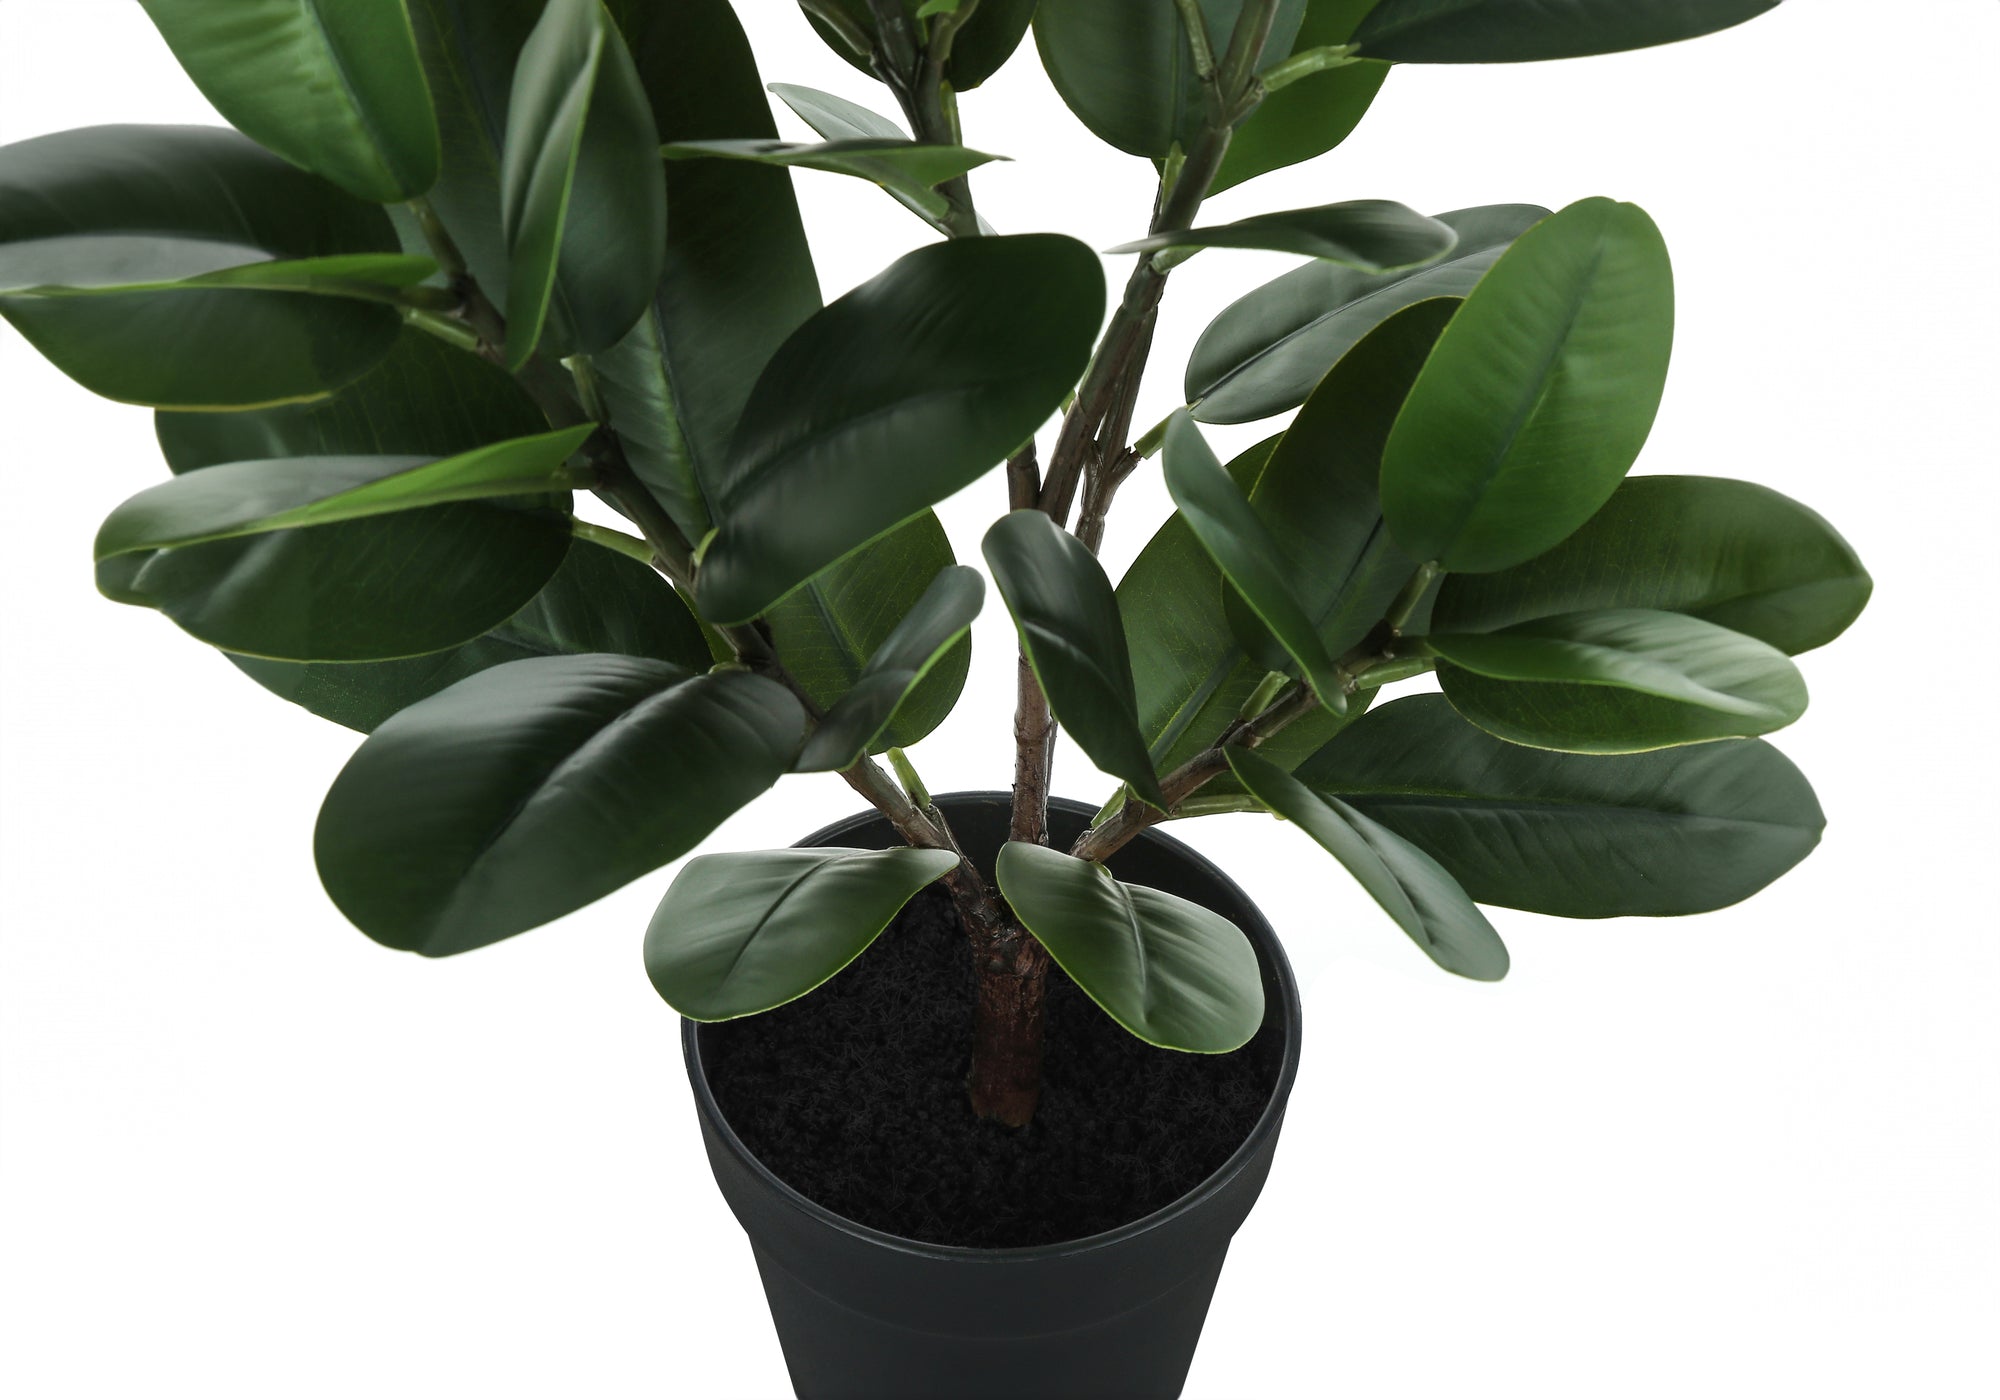 MN-259504    Artificial Plant, 28" Tall, Garcinia Tree, Indoor, Faux, Fake, Floor, Greenery, Potted, Real Touch, Decorative, Green Leaves, Black Pot